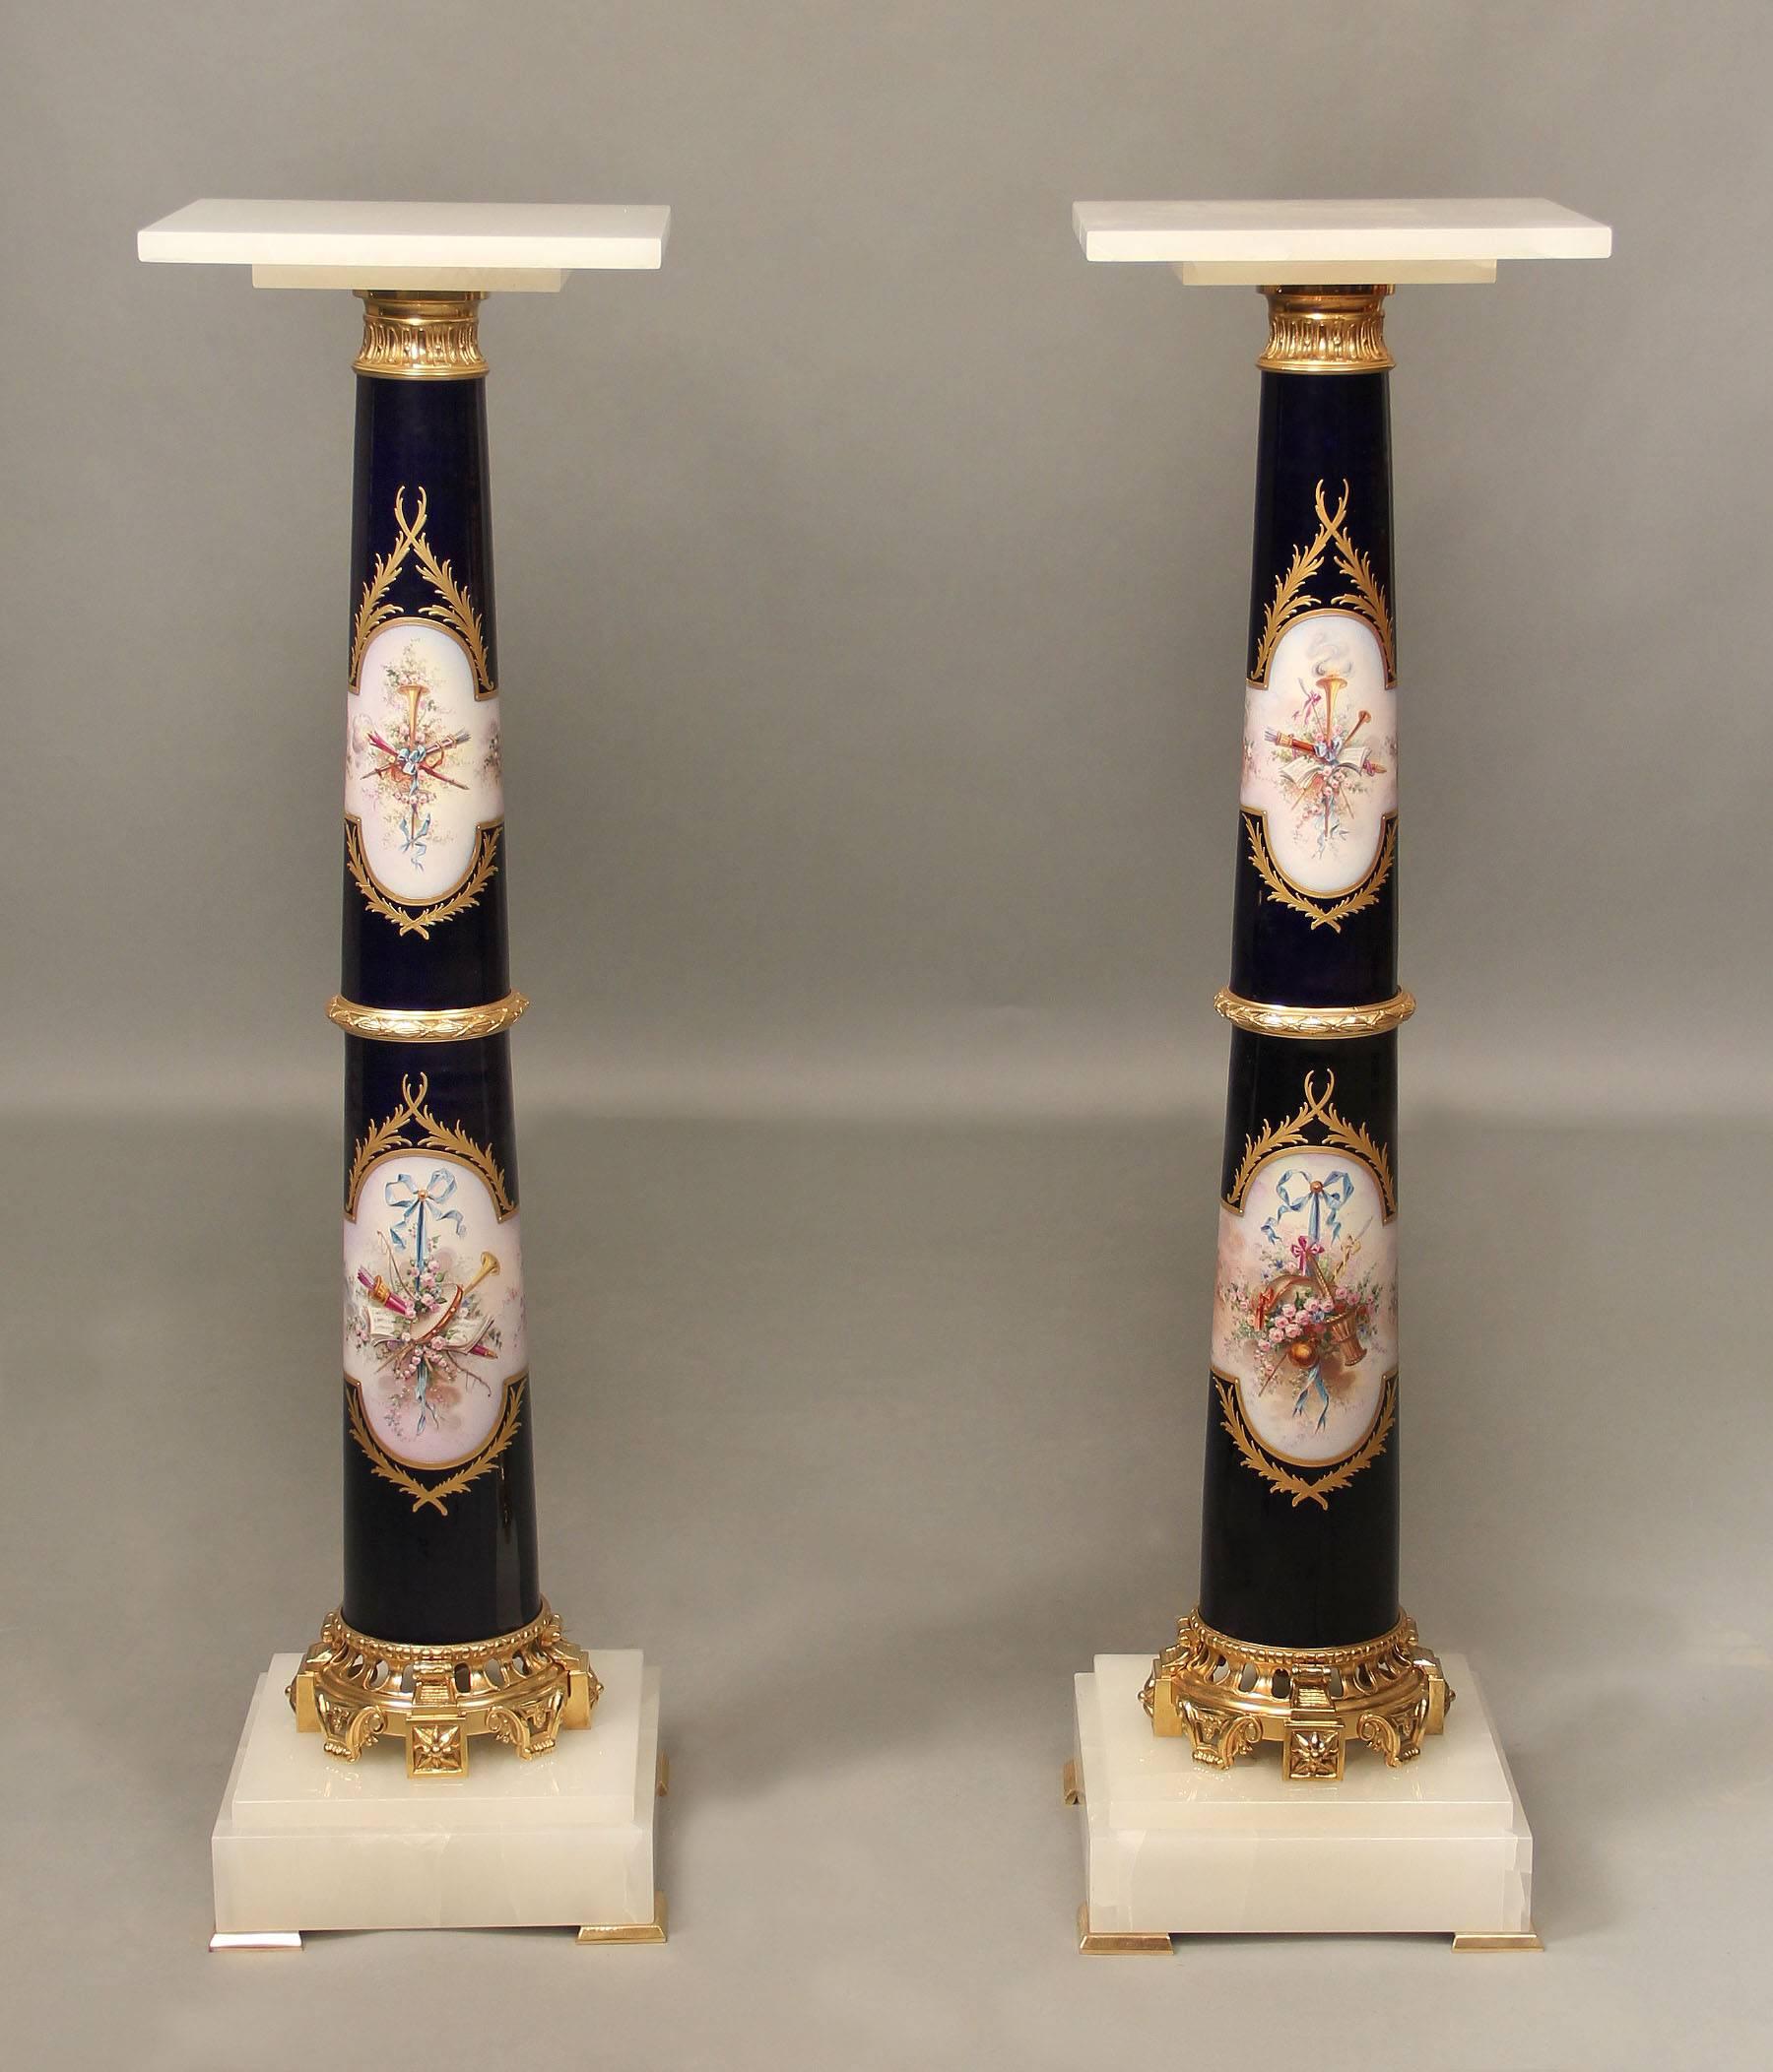 Exceptional Pair of Late 19th Century Gilt Bronze Mounted Sèvres Pedestals For Sale 1